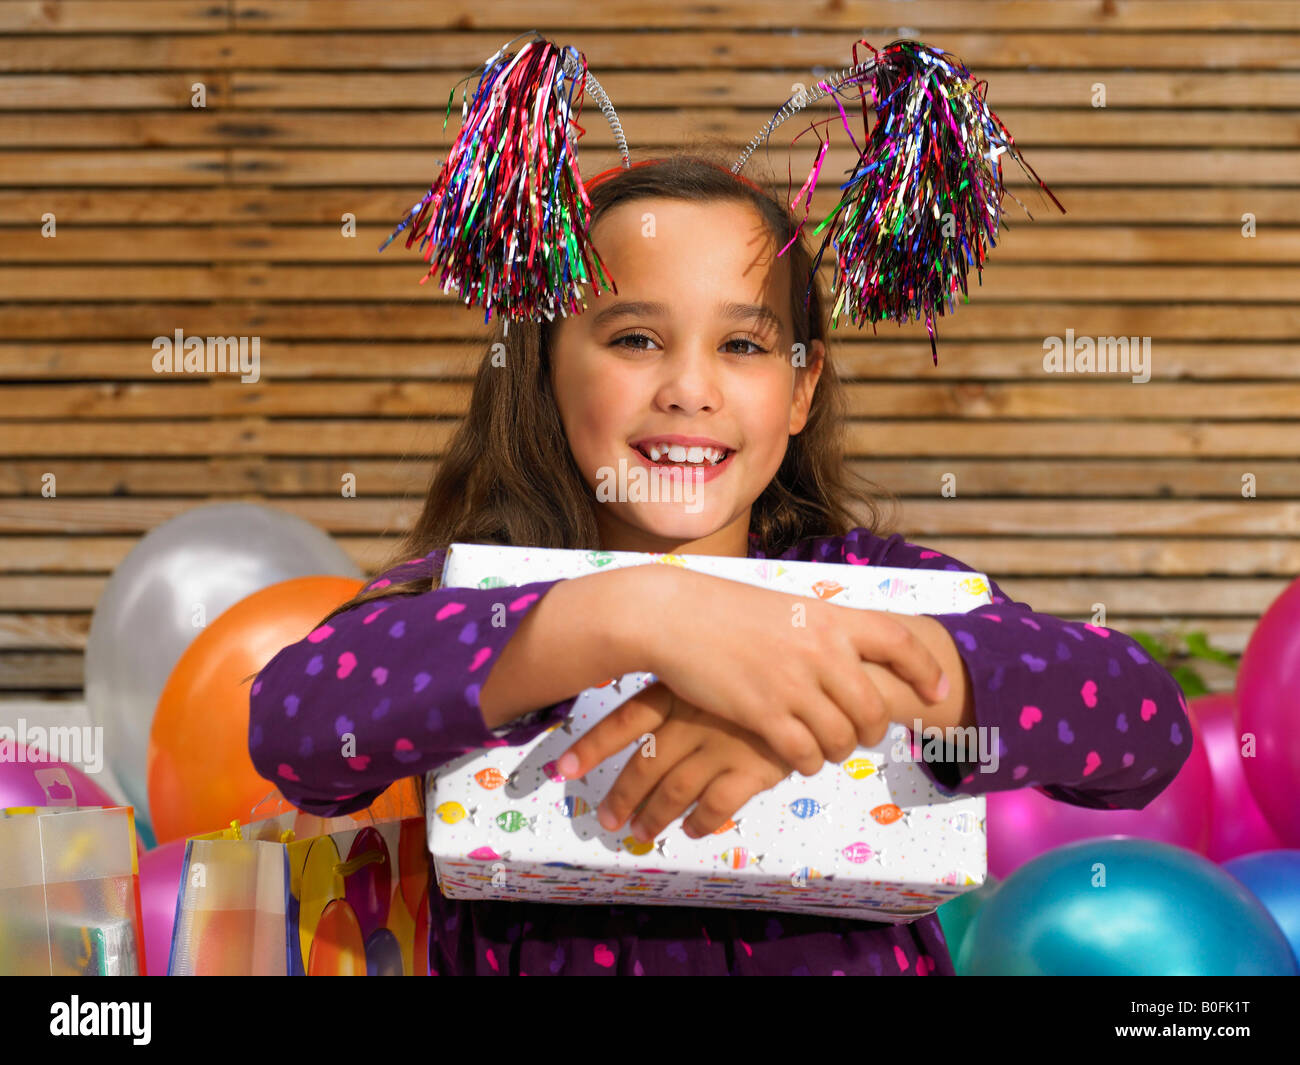 Girl (5-6) holding birthday present Banque D'Images